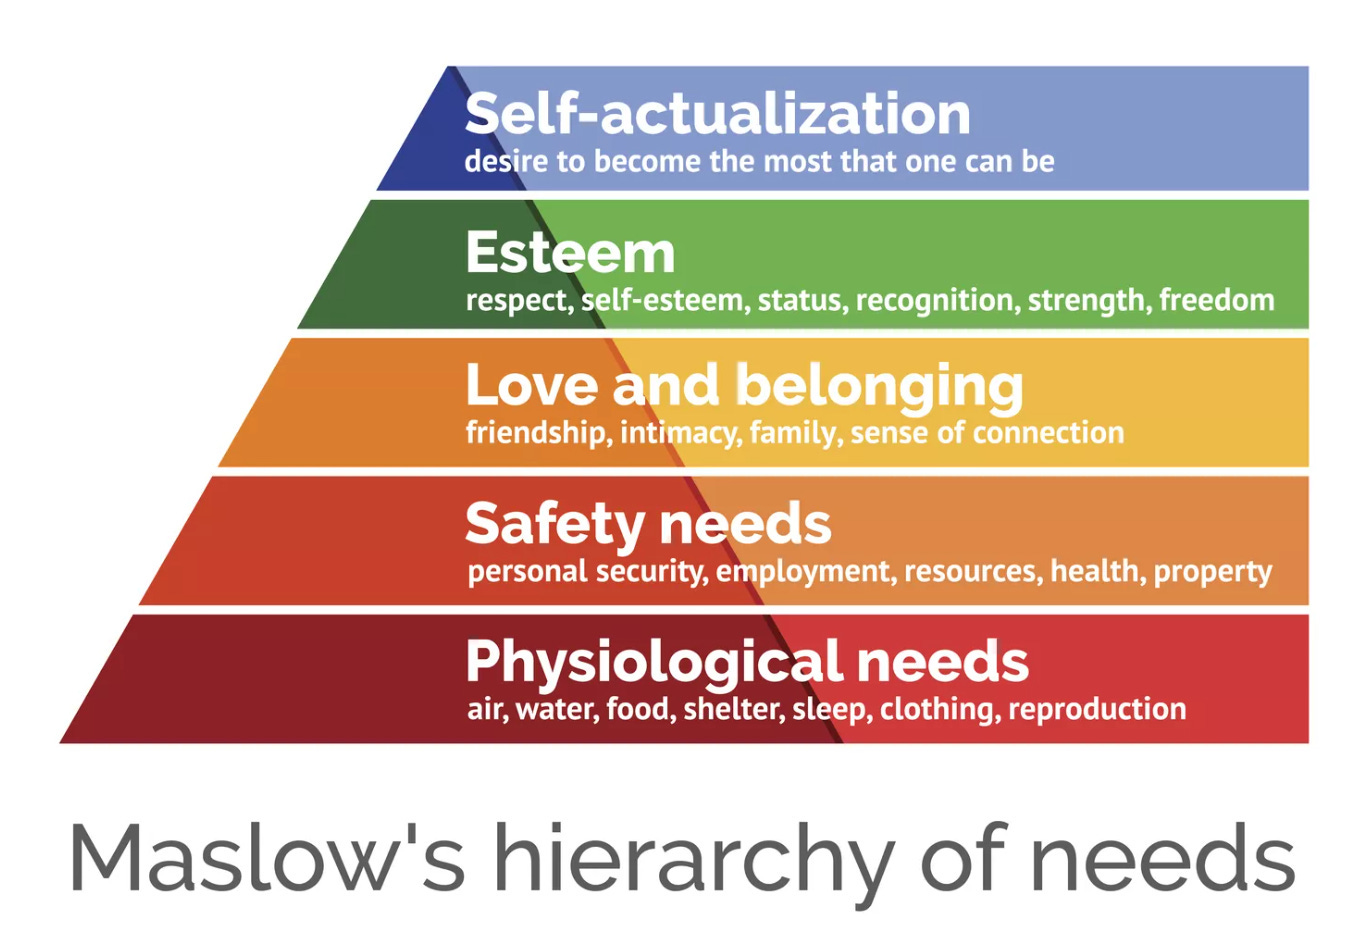 A color-coded image of Maslows mierarchy of needs, presented as a pyramid, with Physiological Needs at the bottom and Self-Actualization at the top.